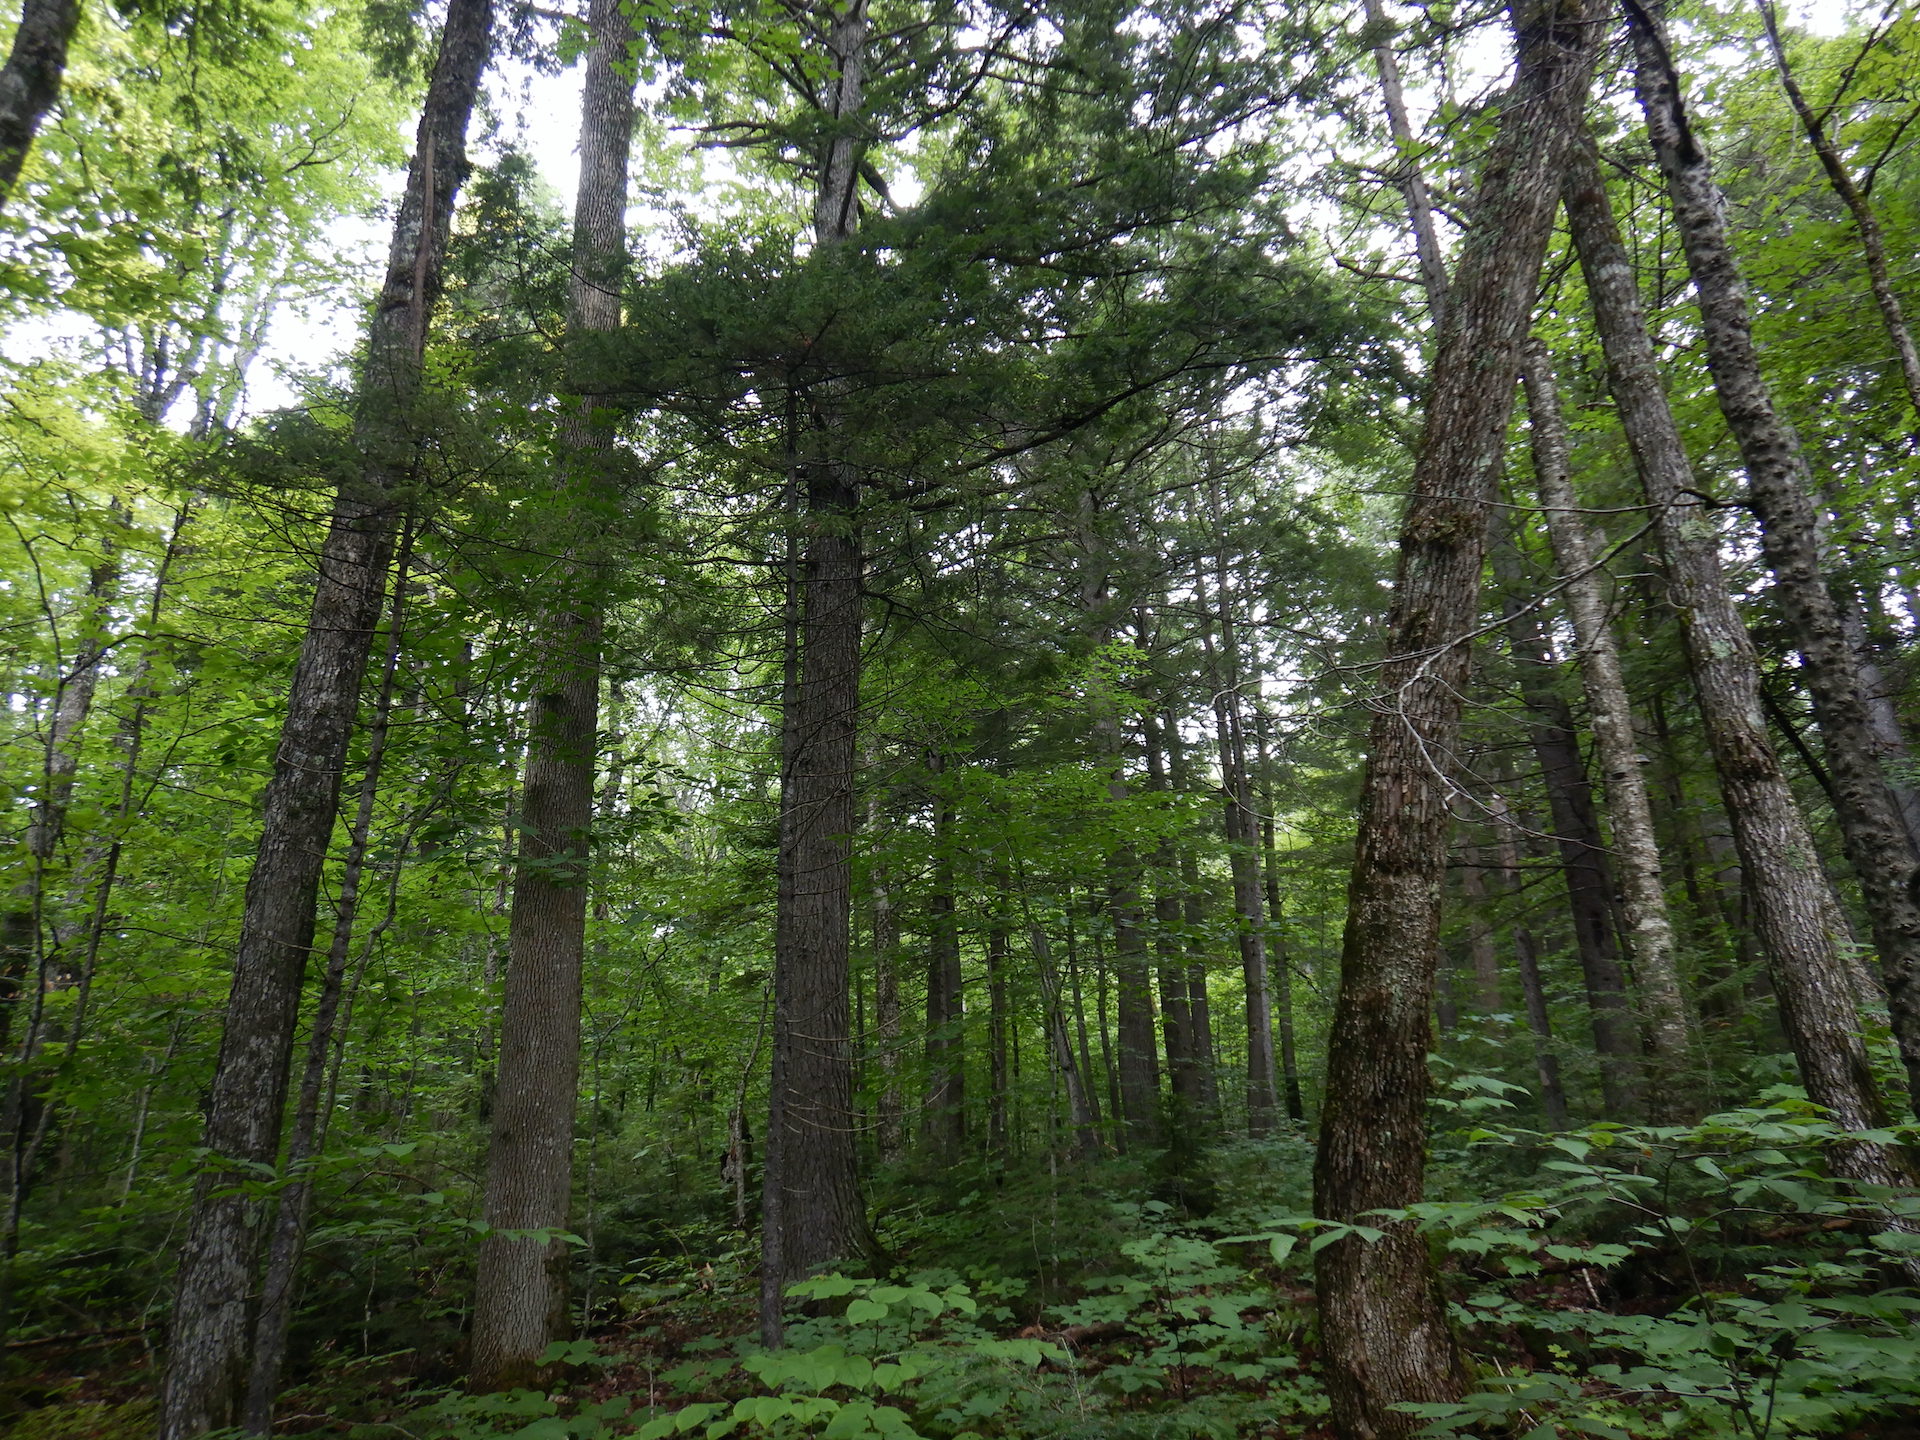 tall trees in a maturing forest, primarily hemlock, maple, and ash.